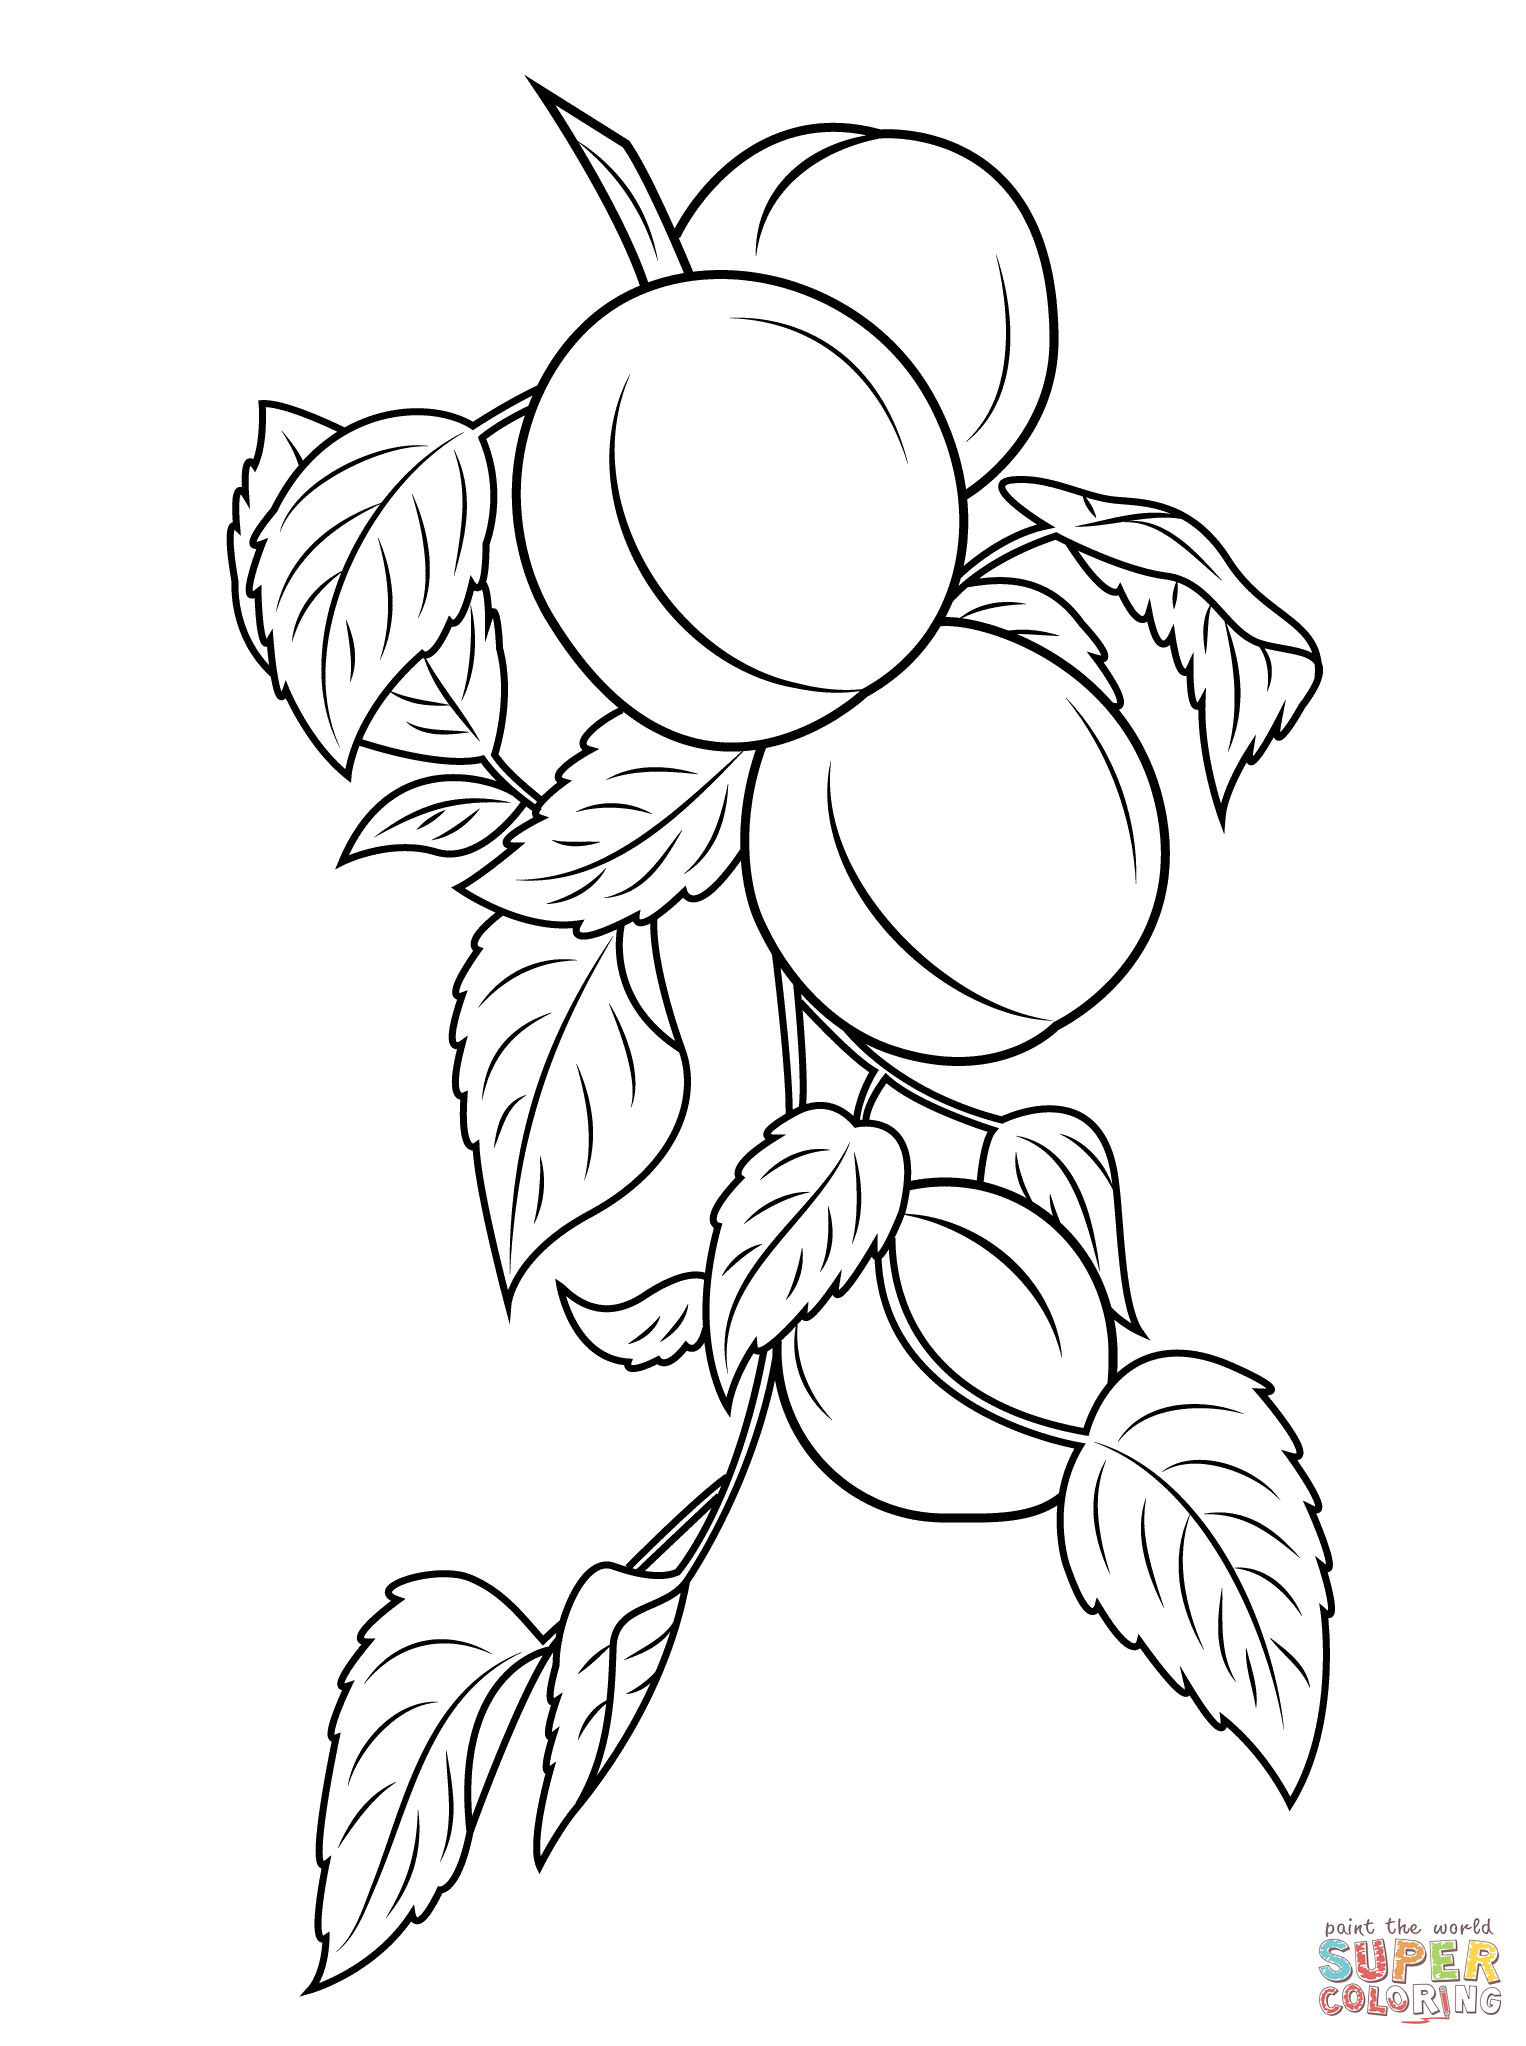 Apricot Blossom coloring #8, Download drawings